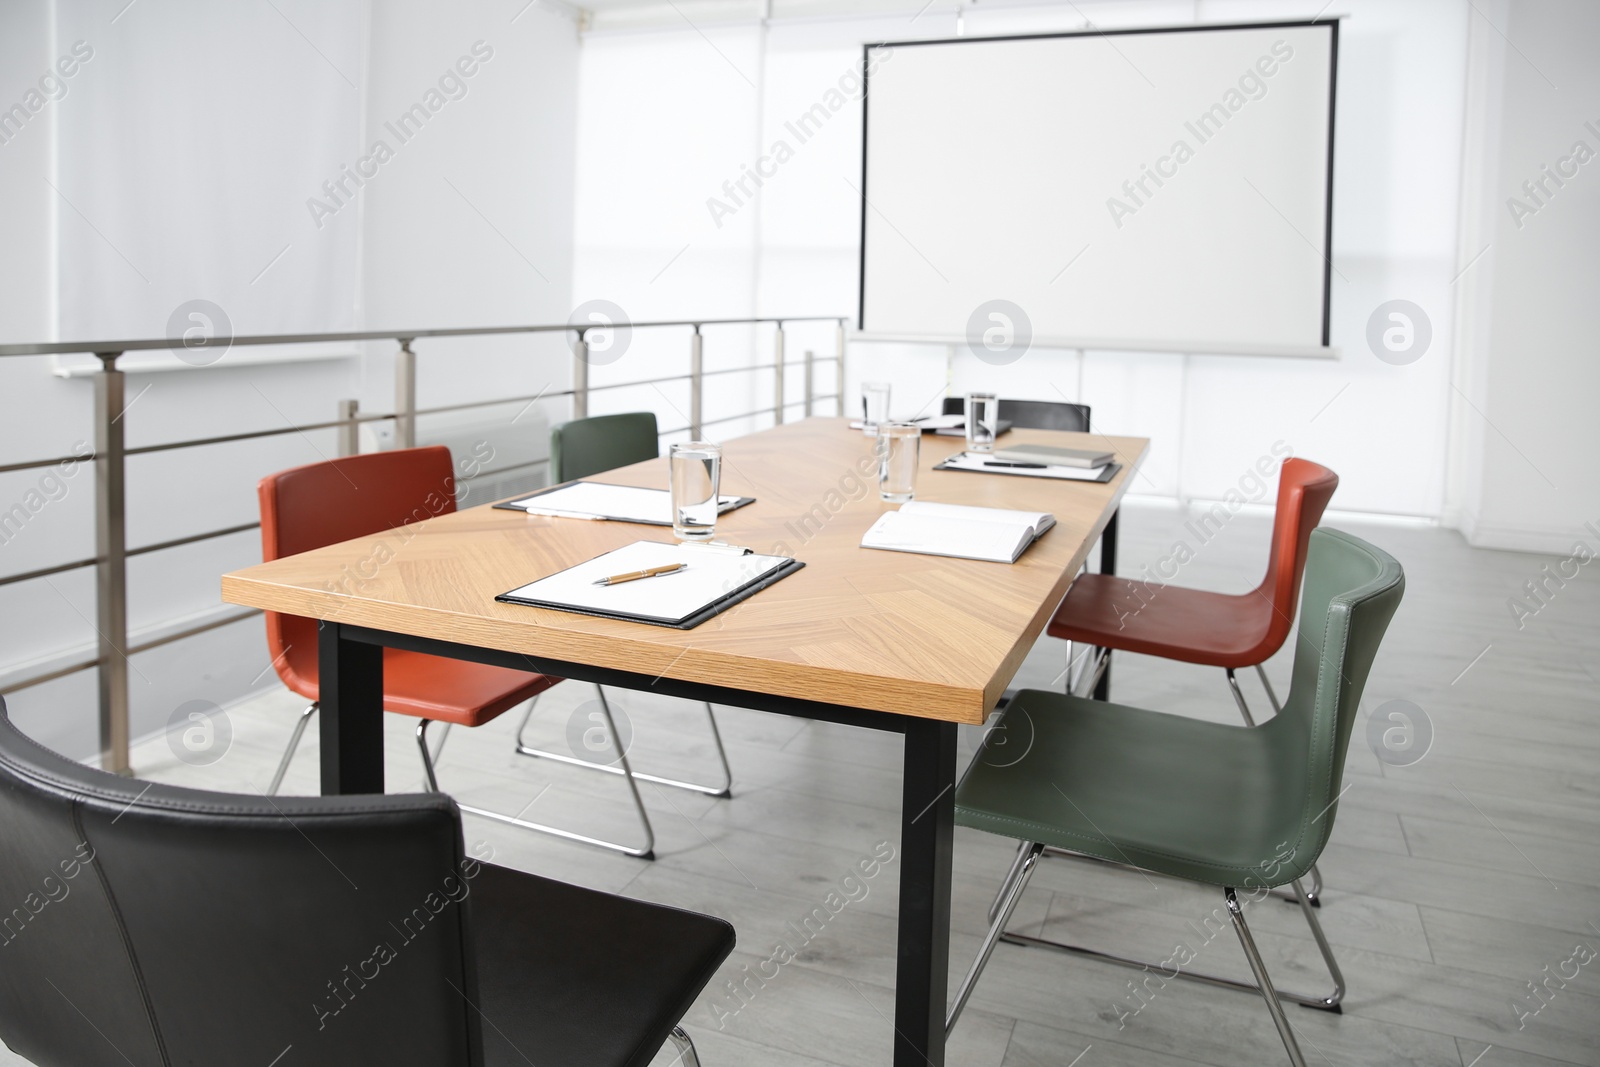 Photo of Modern meeting room interior with large table and projection screen